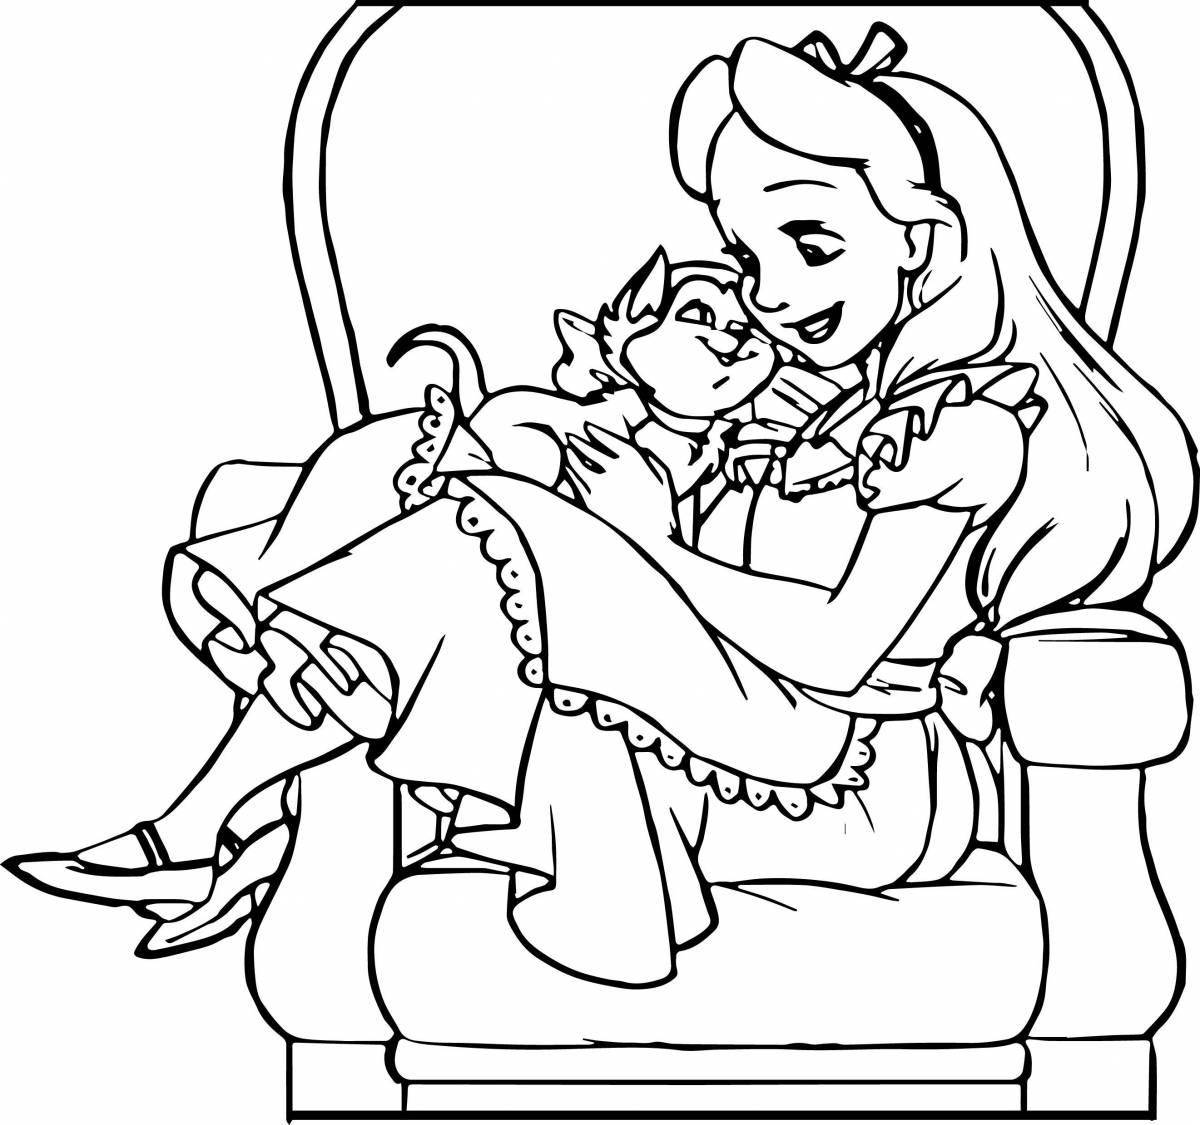 Playful alice coloring for girls